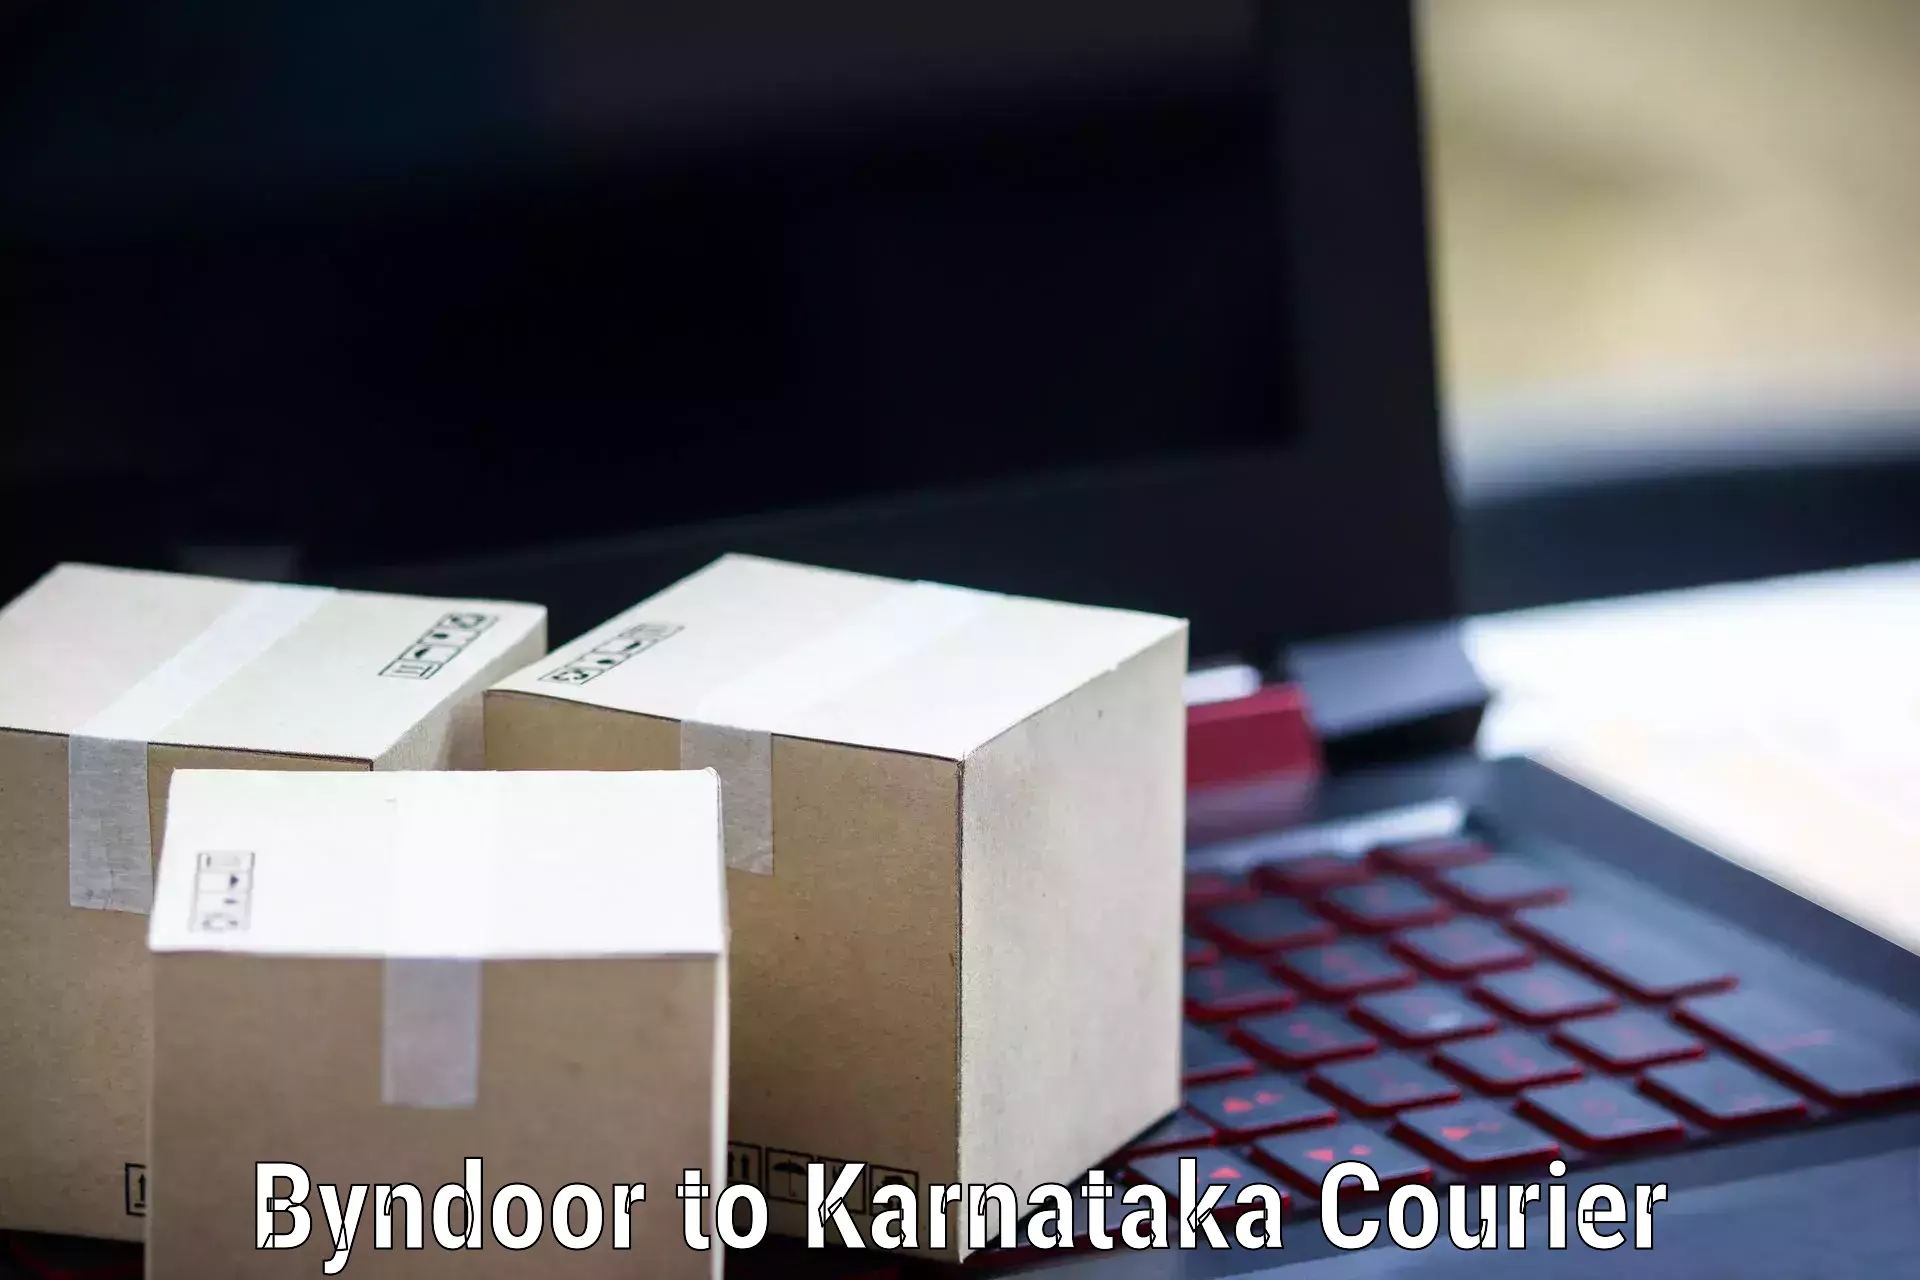 Express delivery capabilities Byndoor to Yellapur